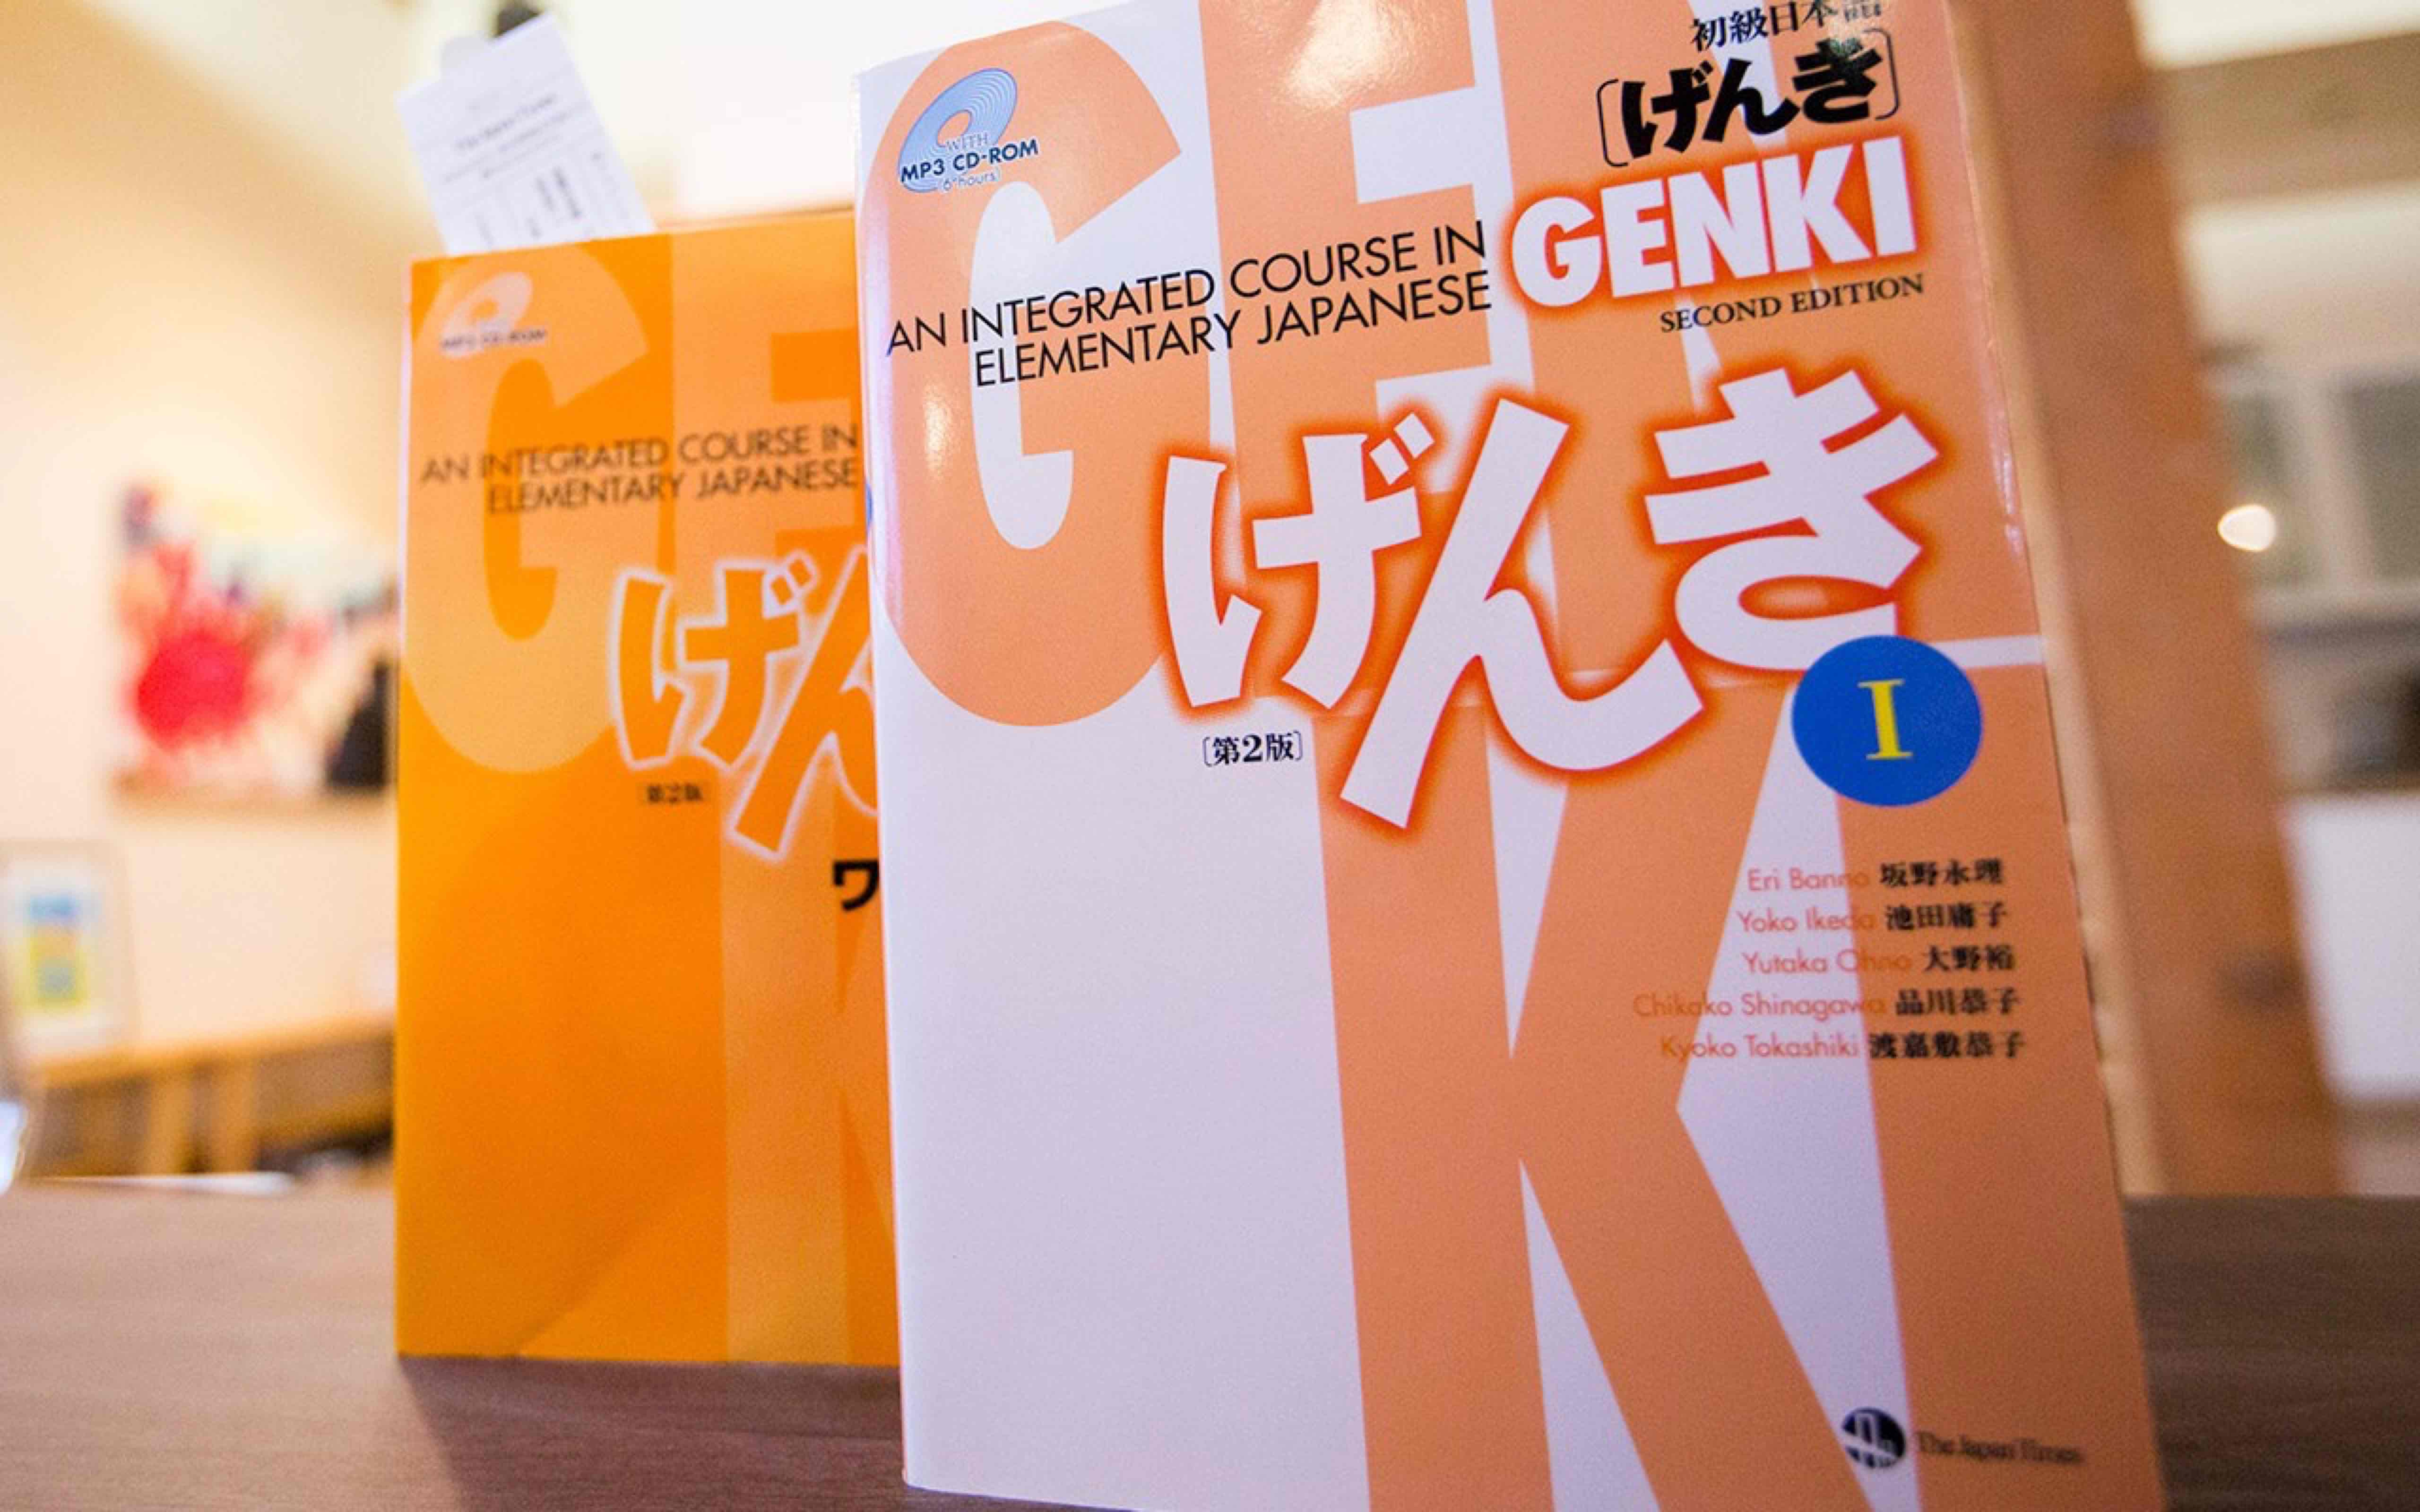 40 Best Japanese Learning Books for Beginners, JLPT Study and More